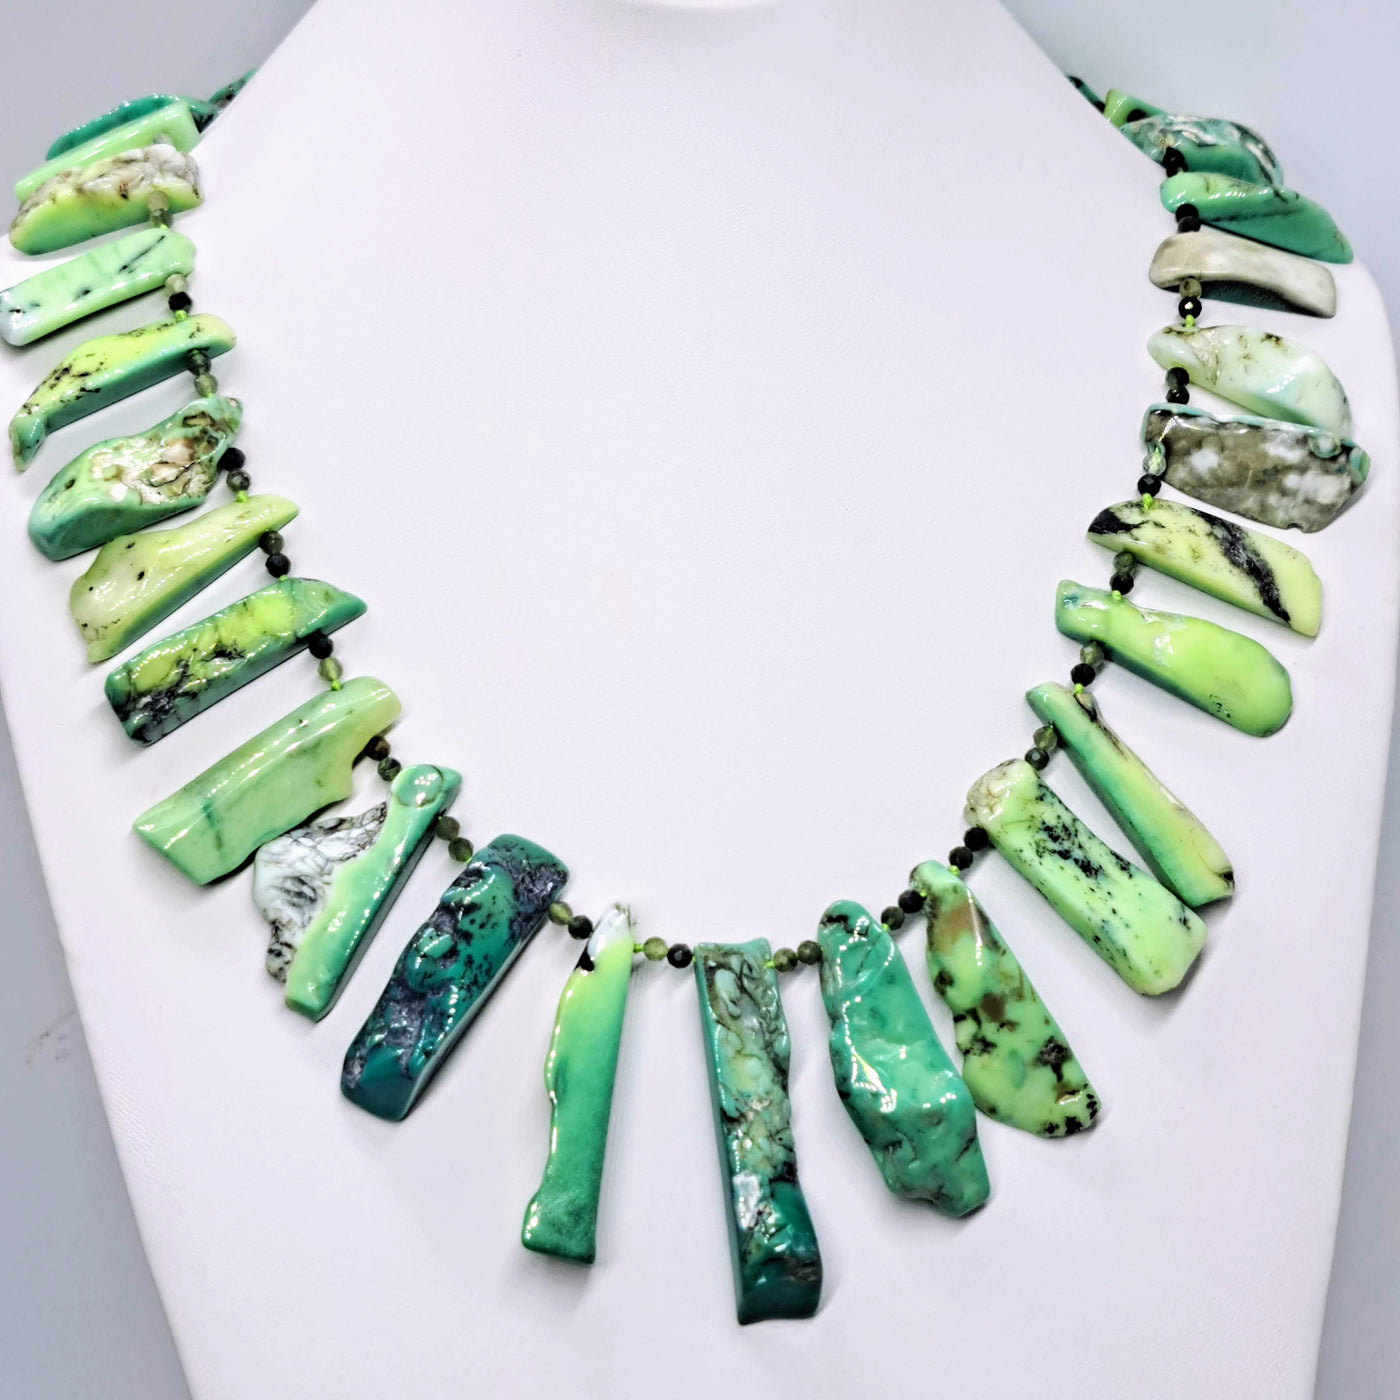 "Edge Of Greatness" 22" Necklace - Live-edge Chrysoprase, Decorative Clasp